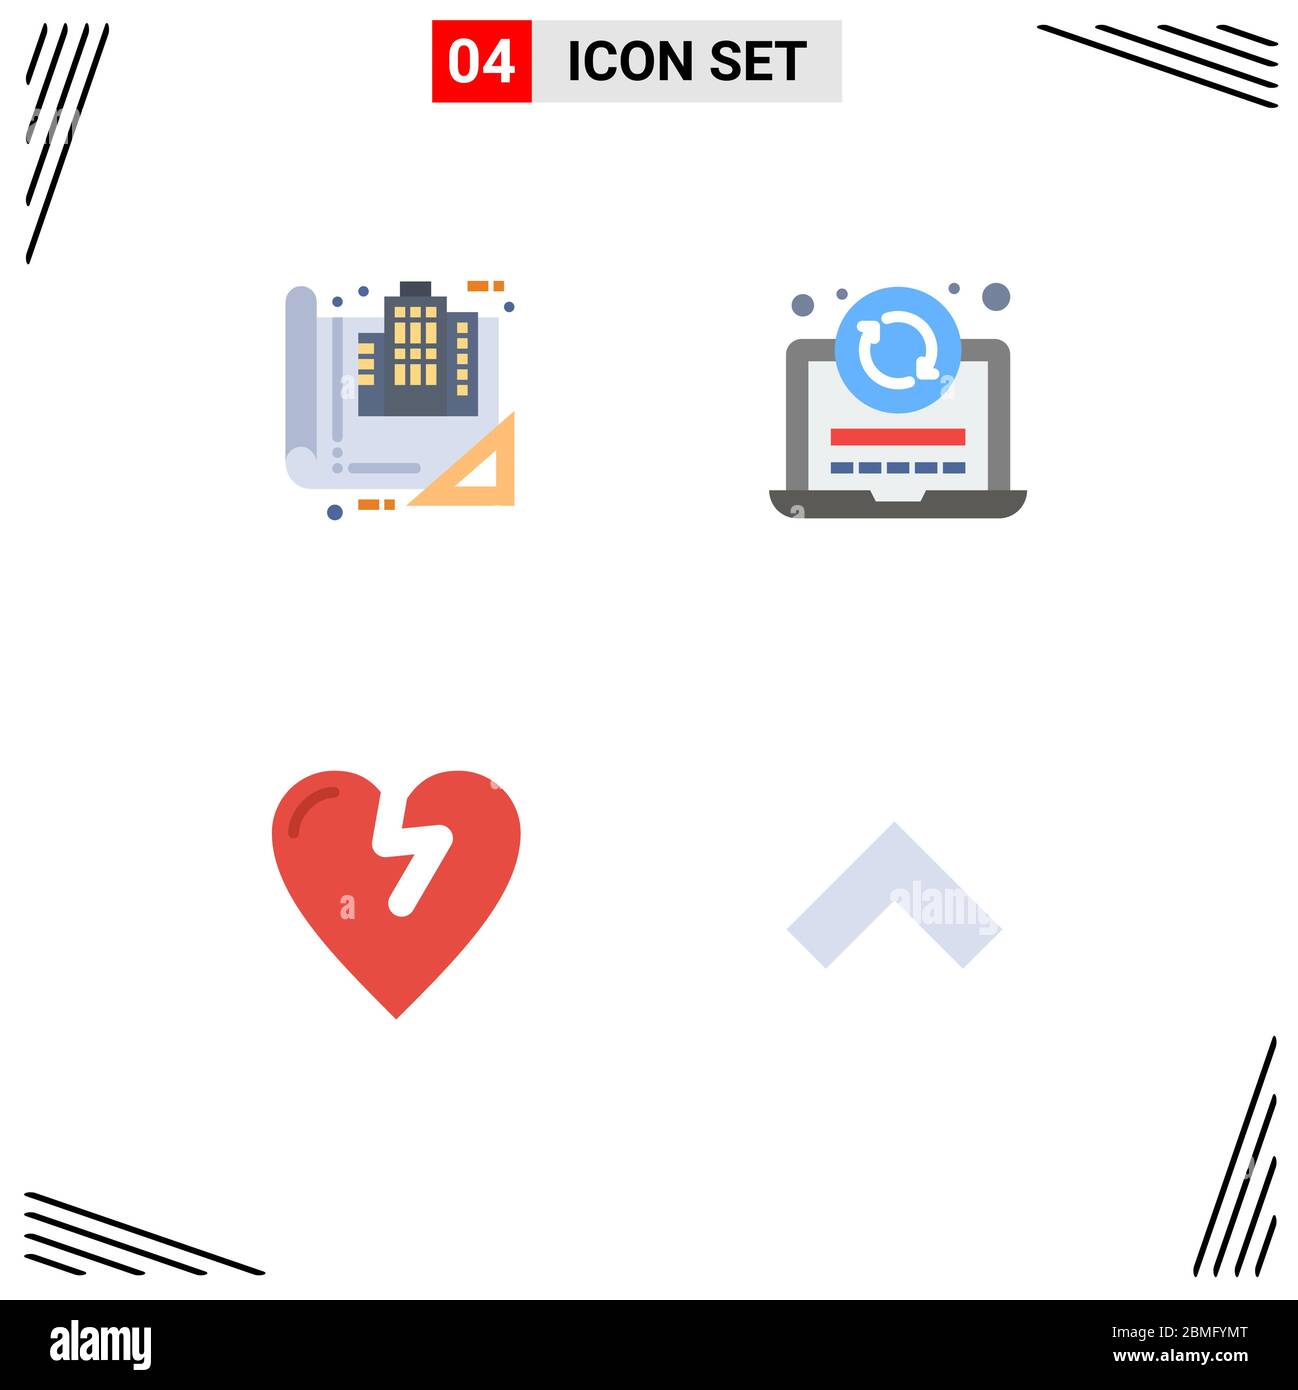 Editable Vector Line Pack of 4 Simple Flat Icons of building, heart attack, construction, refresh, love Editable Vector Design Elements Stock Vector